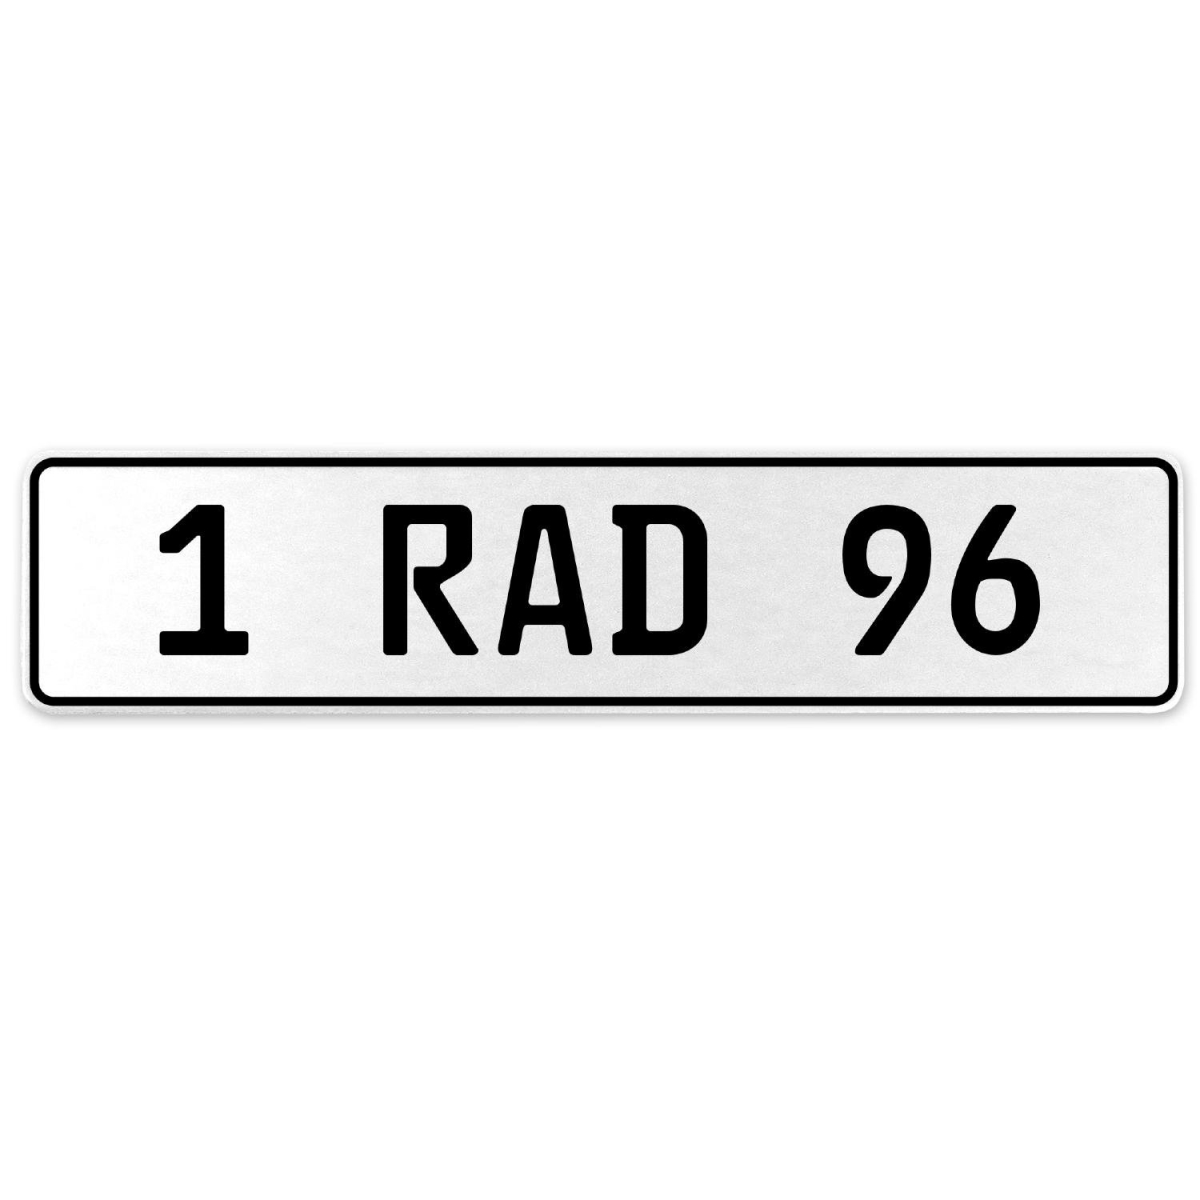 554099 1 Rad 96 - White Aluminum Street Sign Mancave Euro Plate Name Door Sign Wall